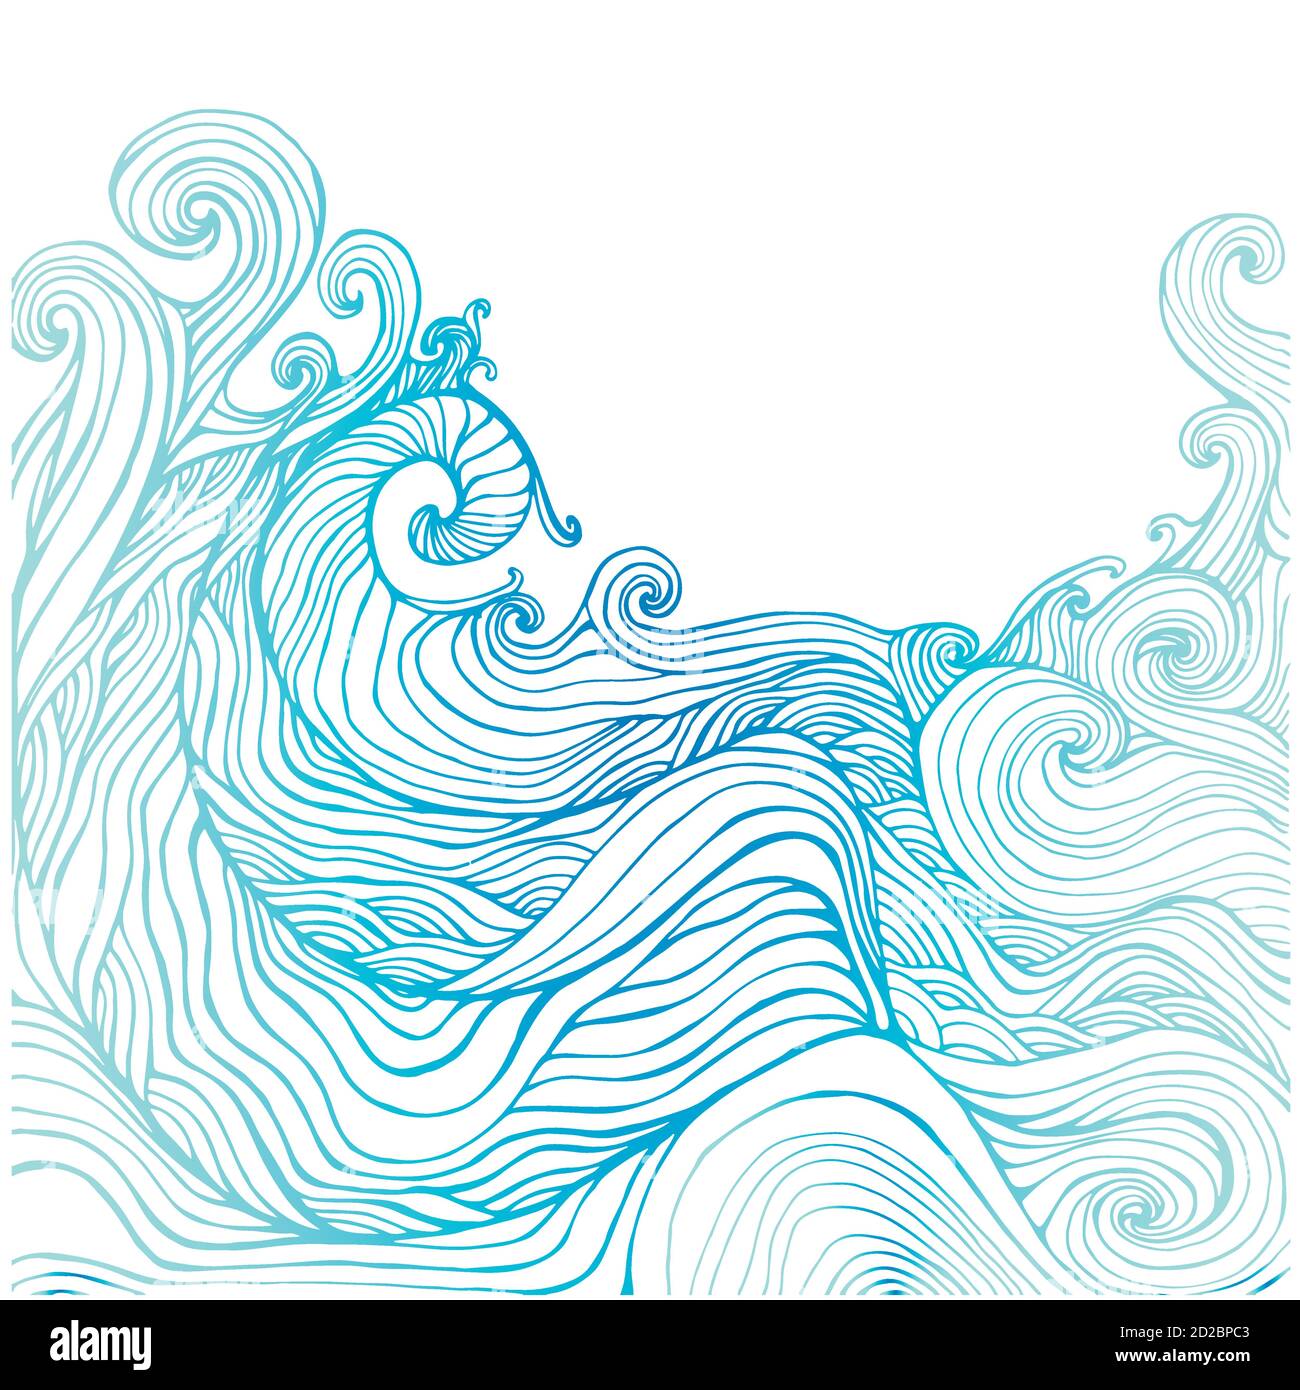 Blue and dark blue decorative doodles waves. Stock Vector